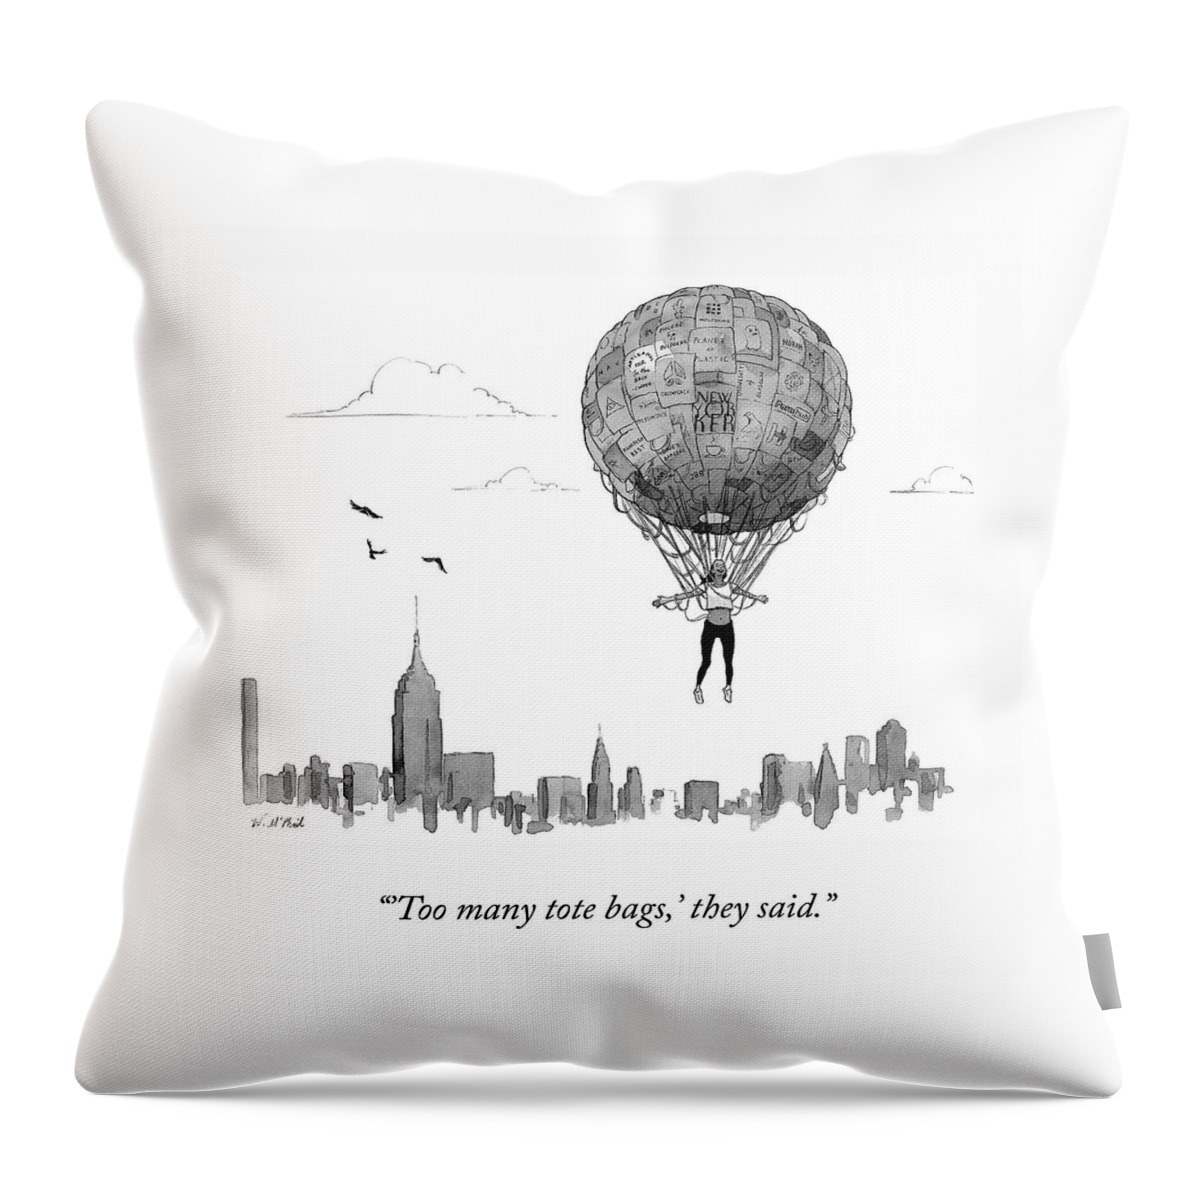 Too Many Tote Bags Throw Pillow